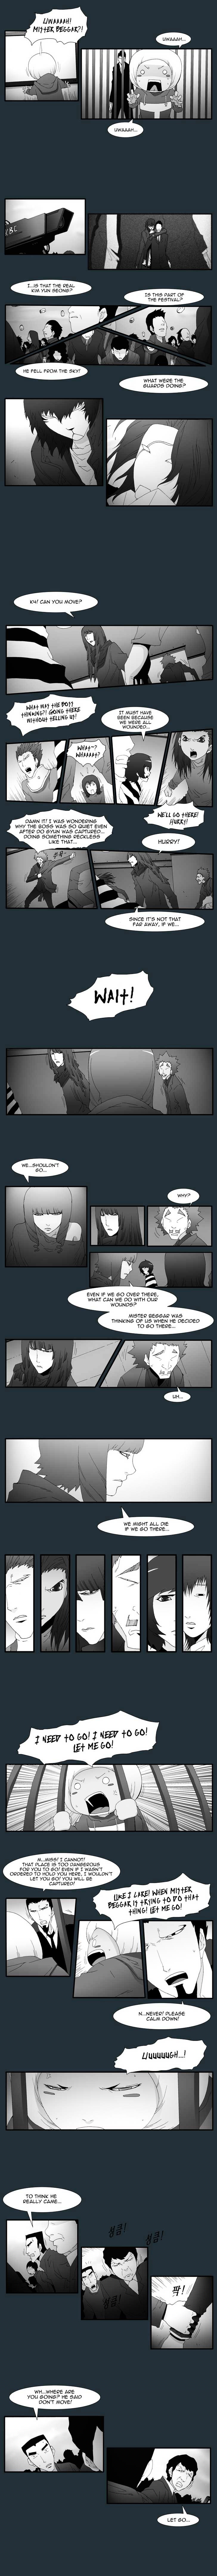 Trace - Page 2